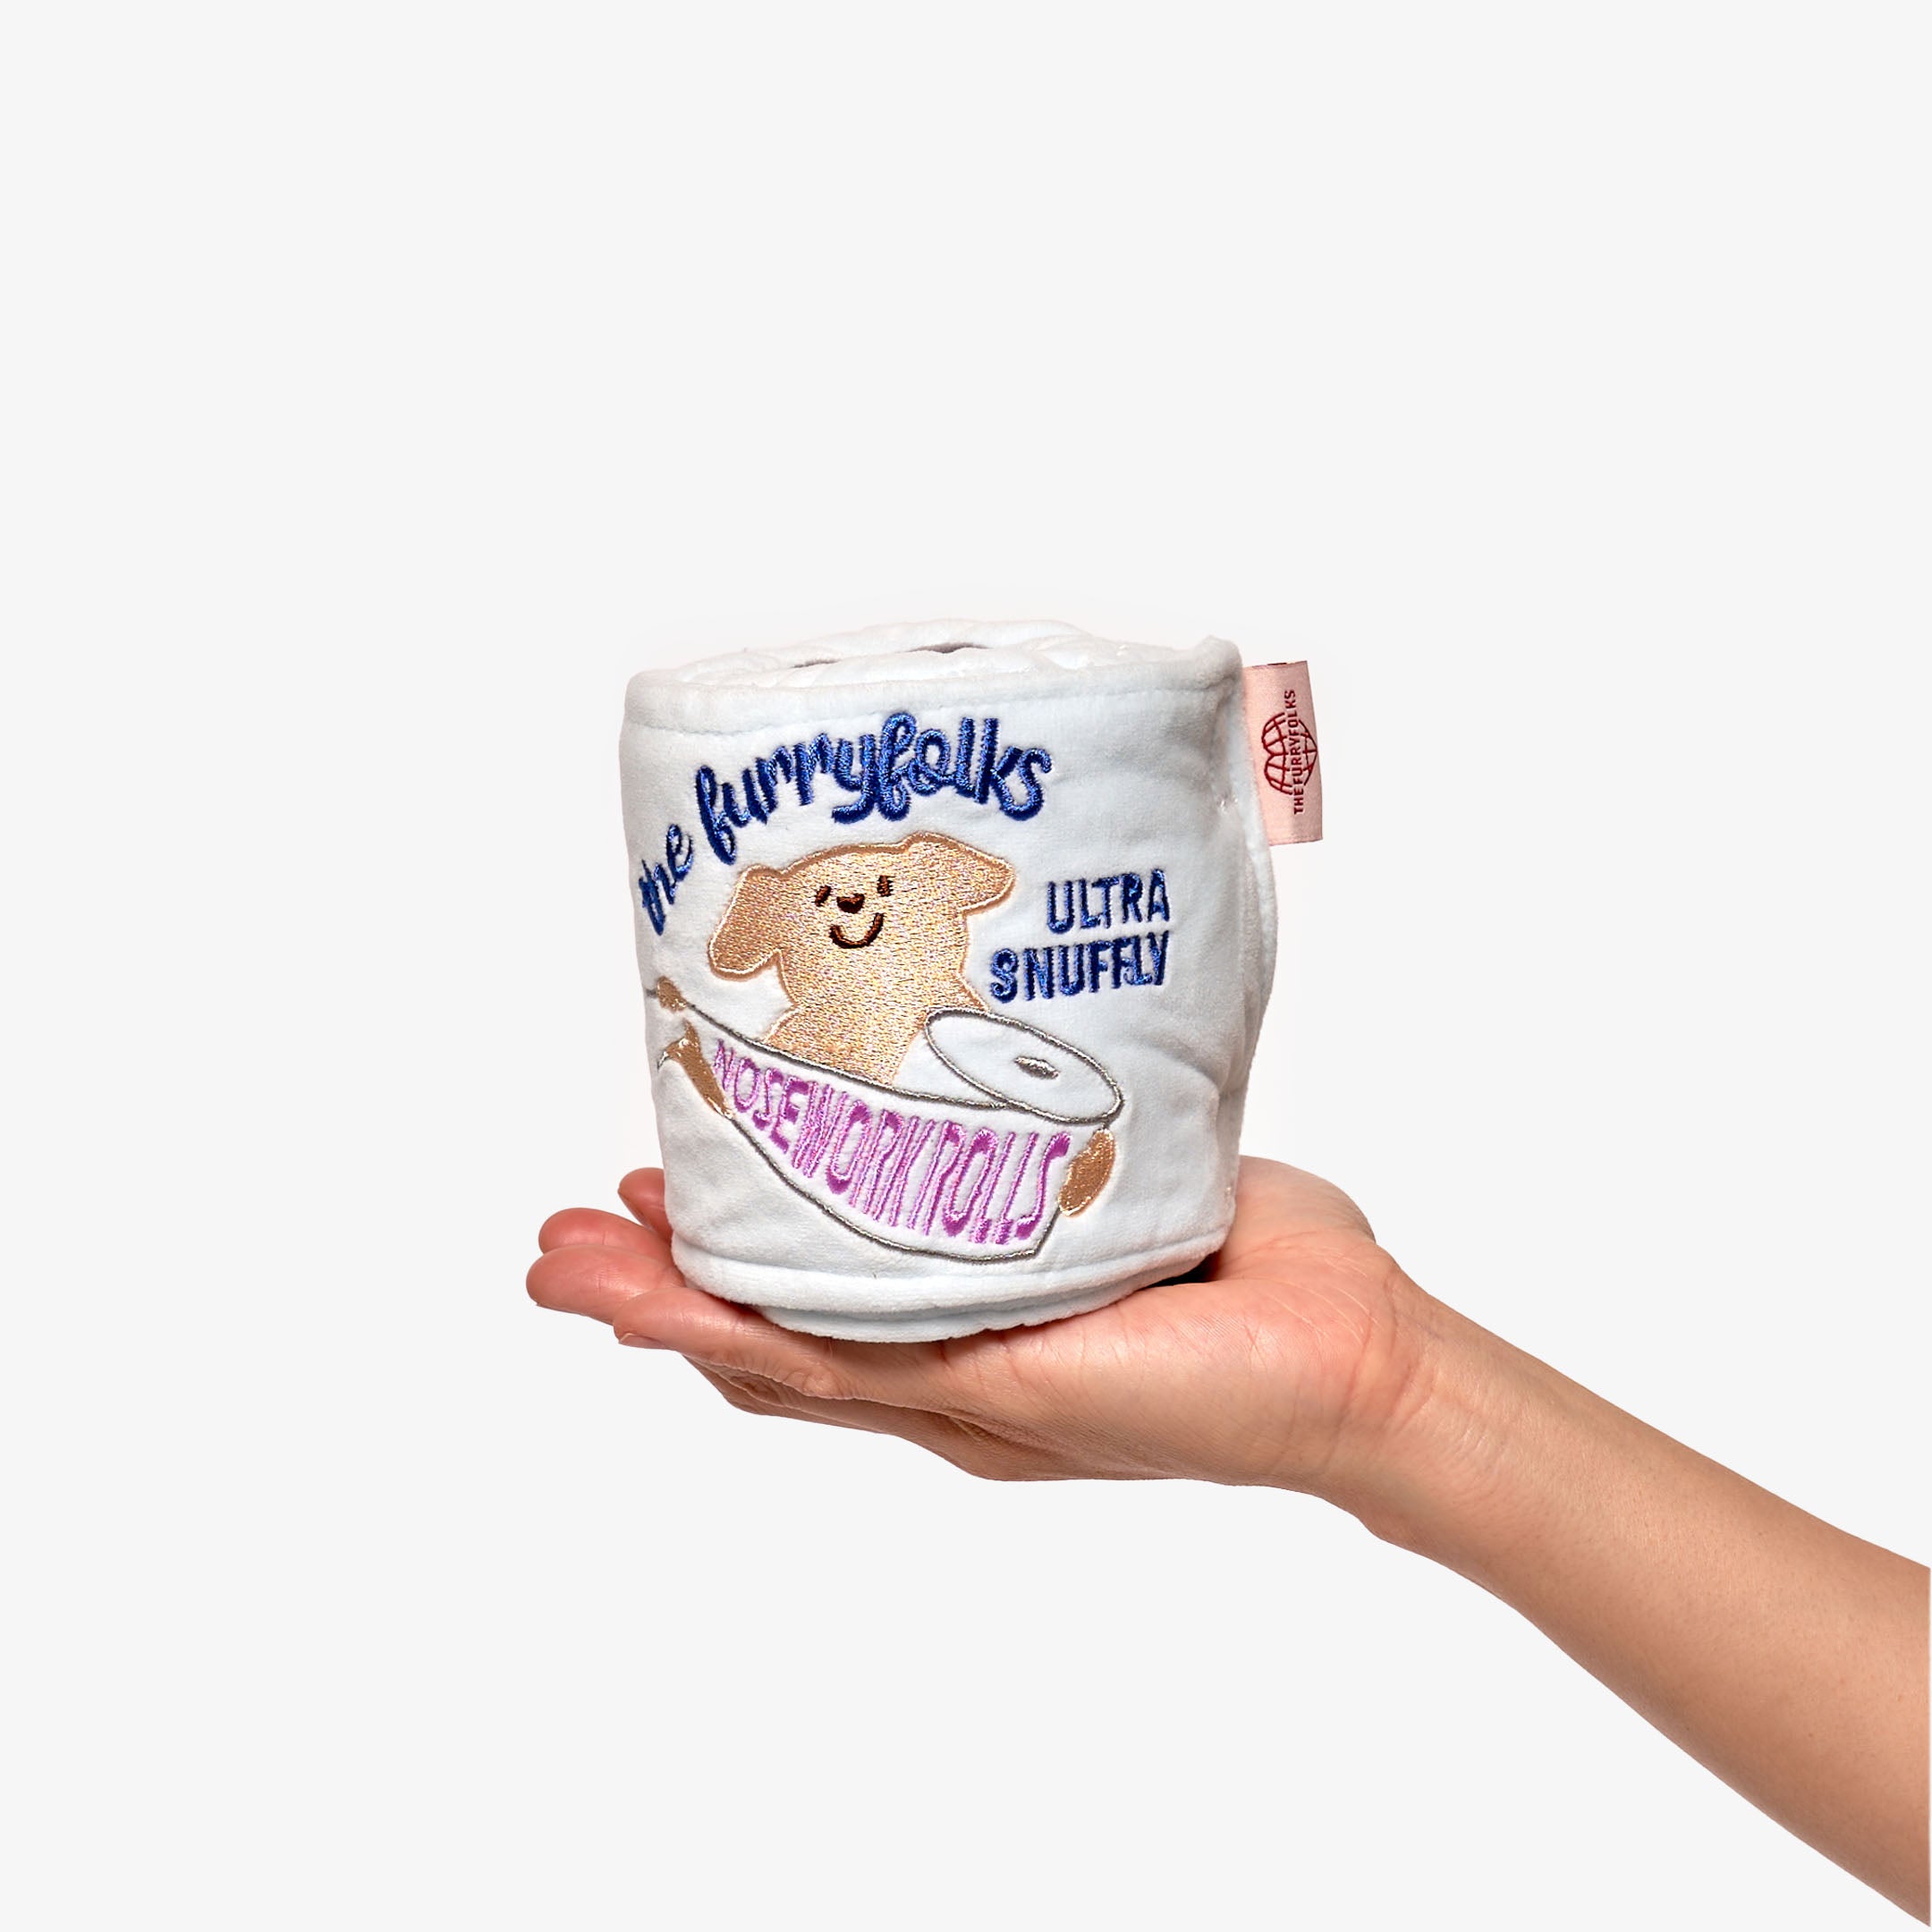 The image shows a hand holding a plush dog toy. The toy is white with embroidered details including a smiling dog's face, the text "The Furryfolks", and the words "ULTRA SNUFFLY" in a decorative font. There's also a depiction of a toilet paper roll, adding a humorous touch. The toy has a pink tag on the side with what appears to be the brand's logo. The background is neutral, putting the focus on the toy itself. This appears to be a product designed for dogs to enjoy snuggling and playing with.